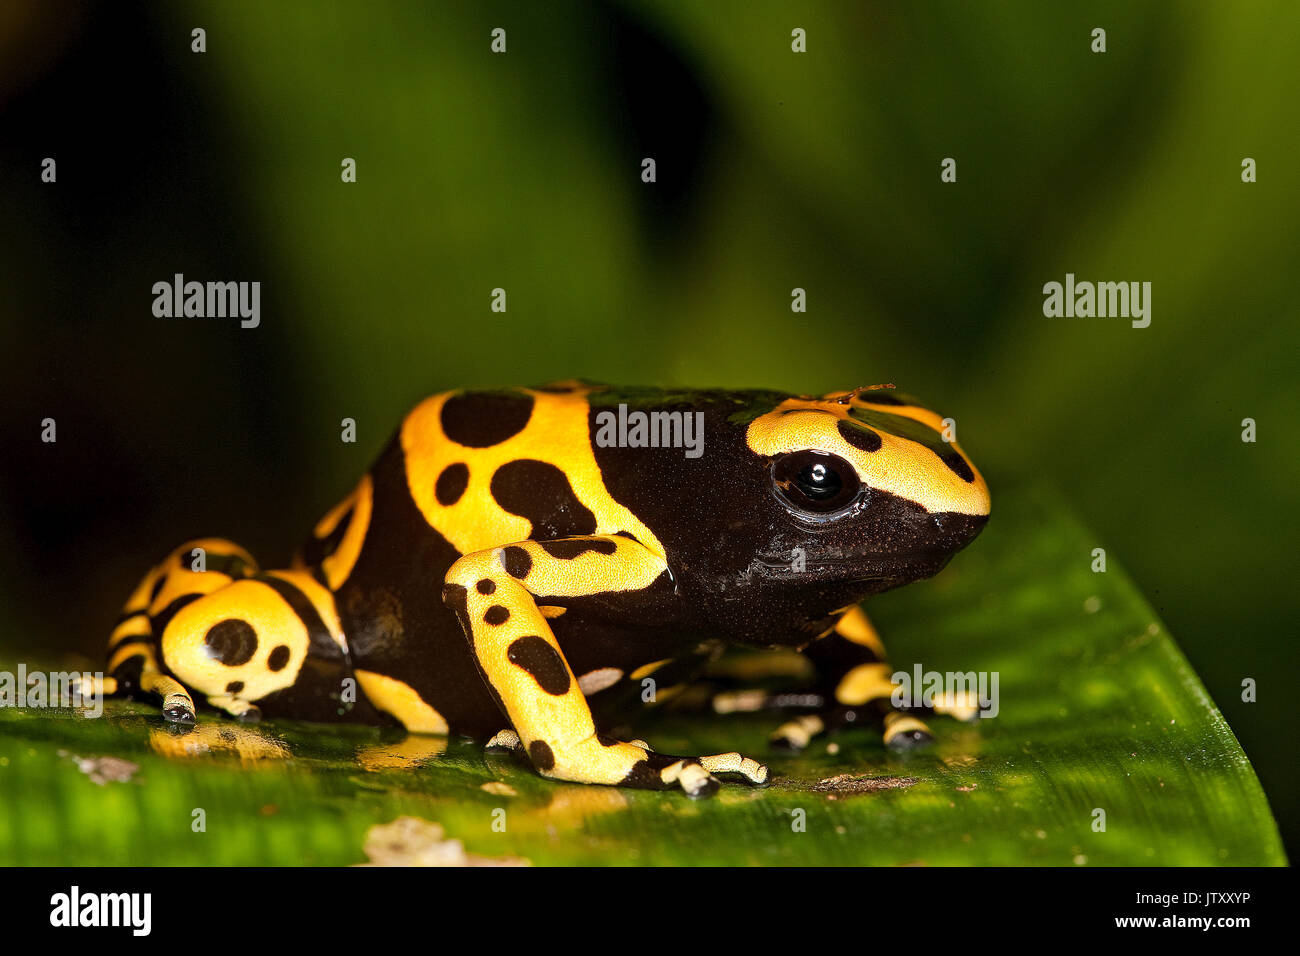 Yellow-Banded Poisson Frog, dendrobates leucomelas, Venemous Specy from South America, Adult Stock Photo